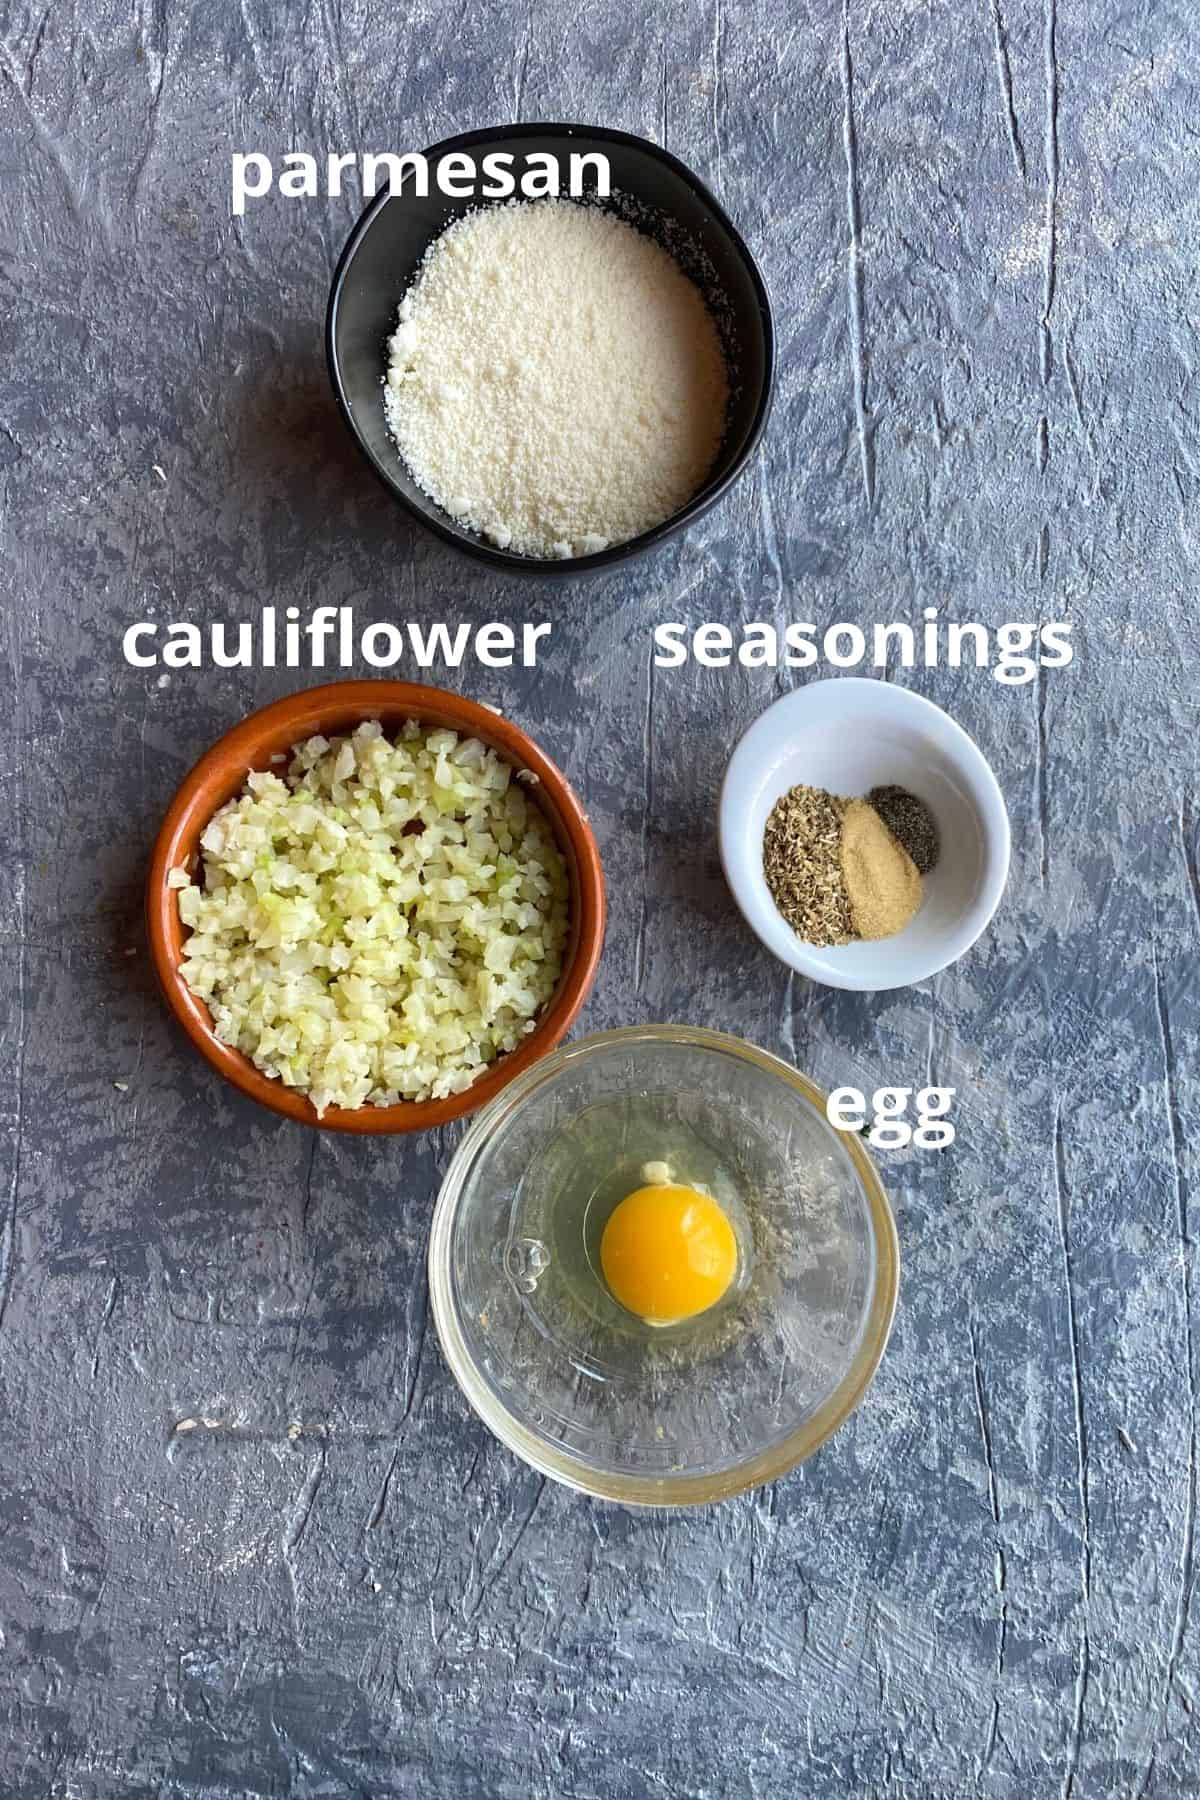 An overhead view of the ingredients to make cauliflower crust pizza; cauliflower, parmesan, seasonings, and egg